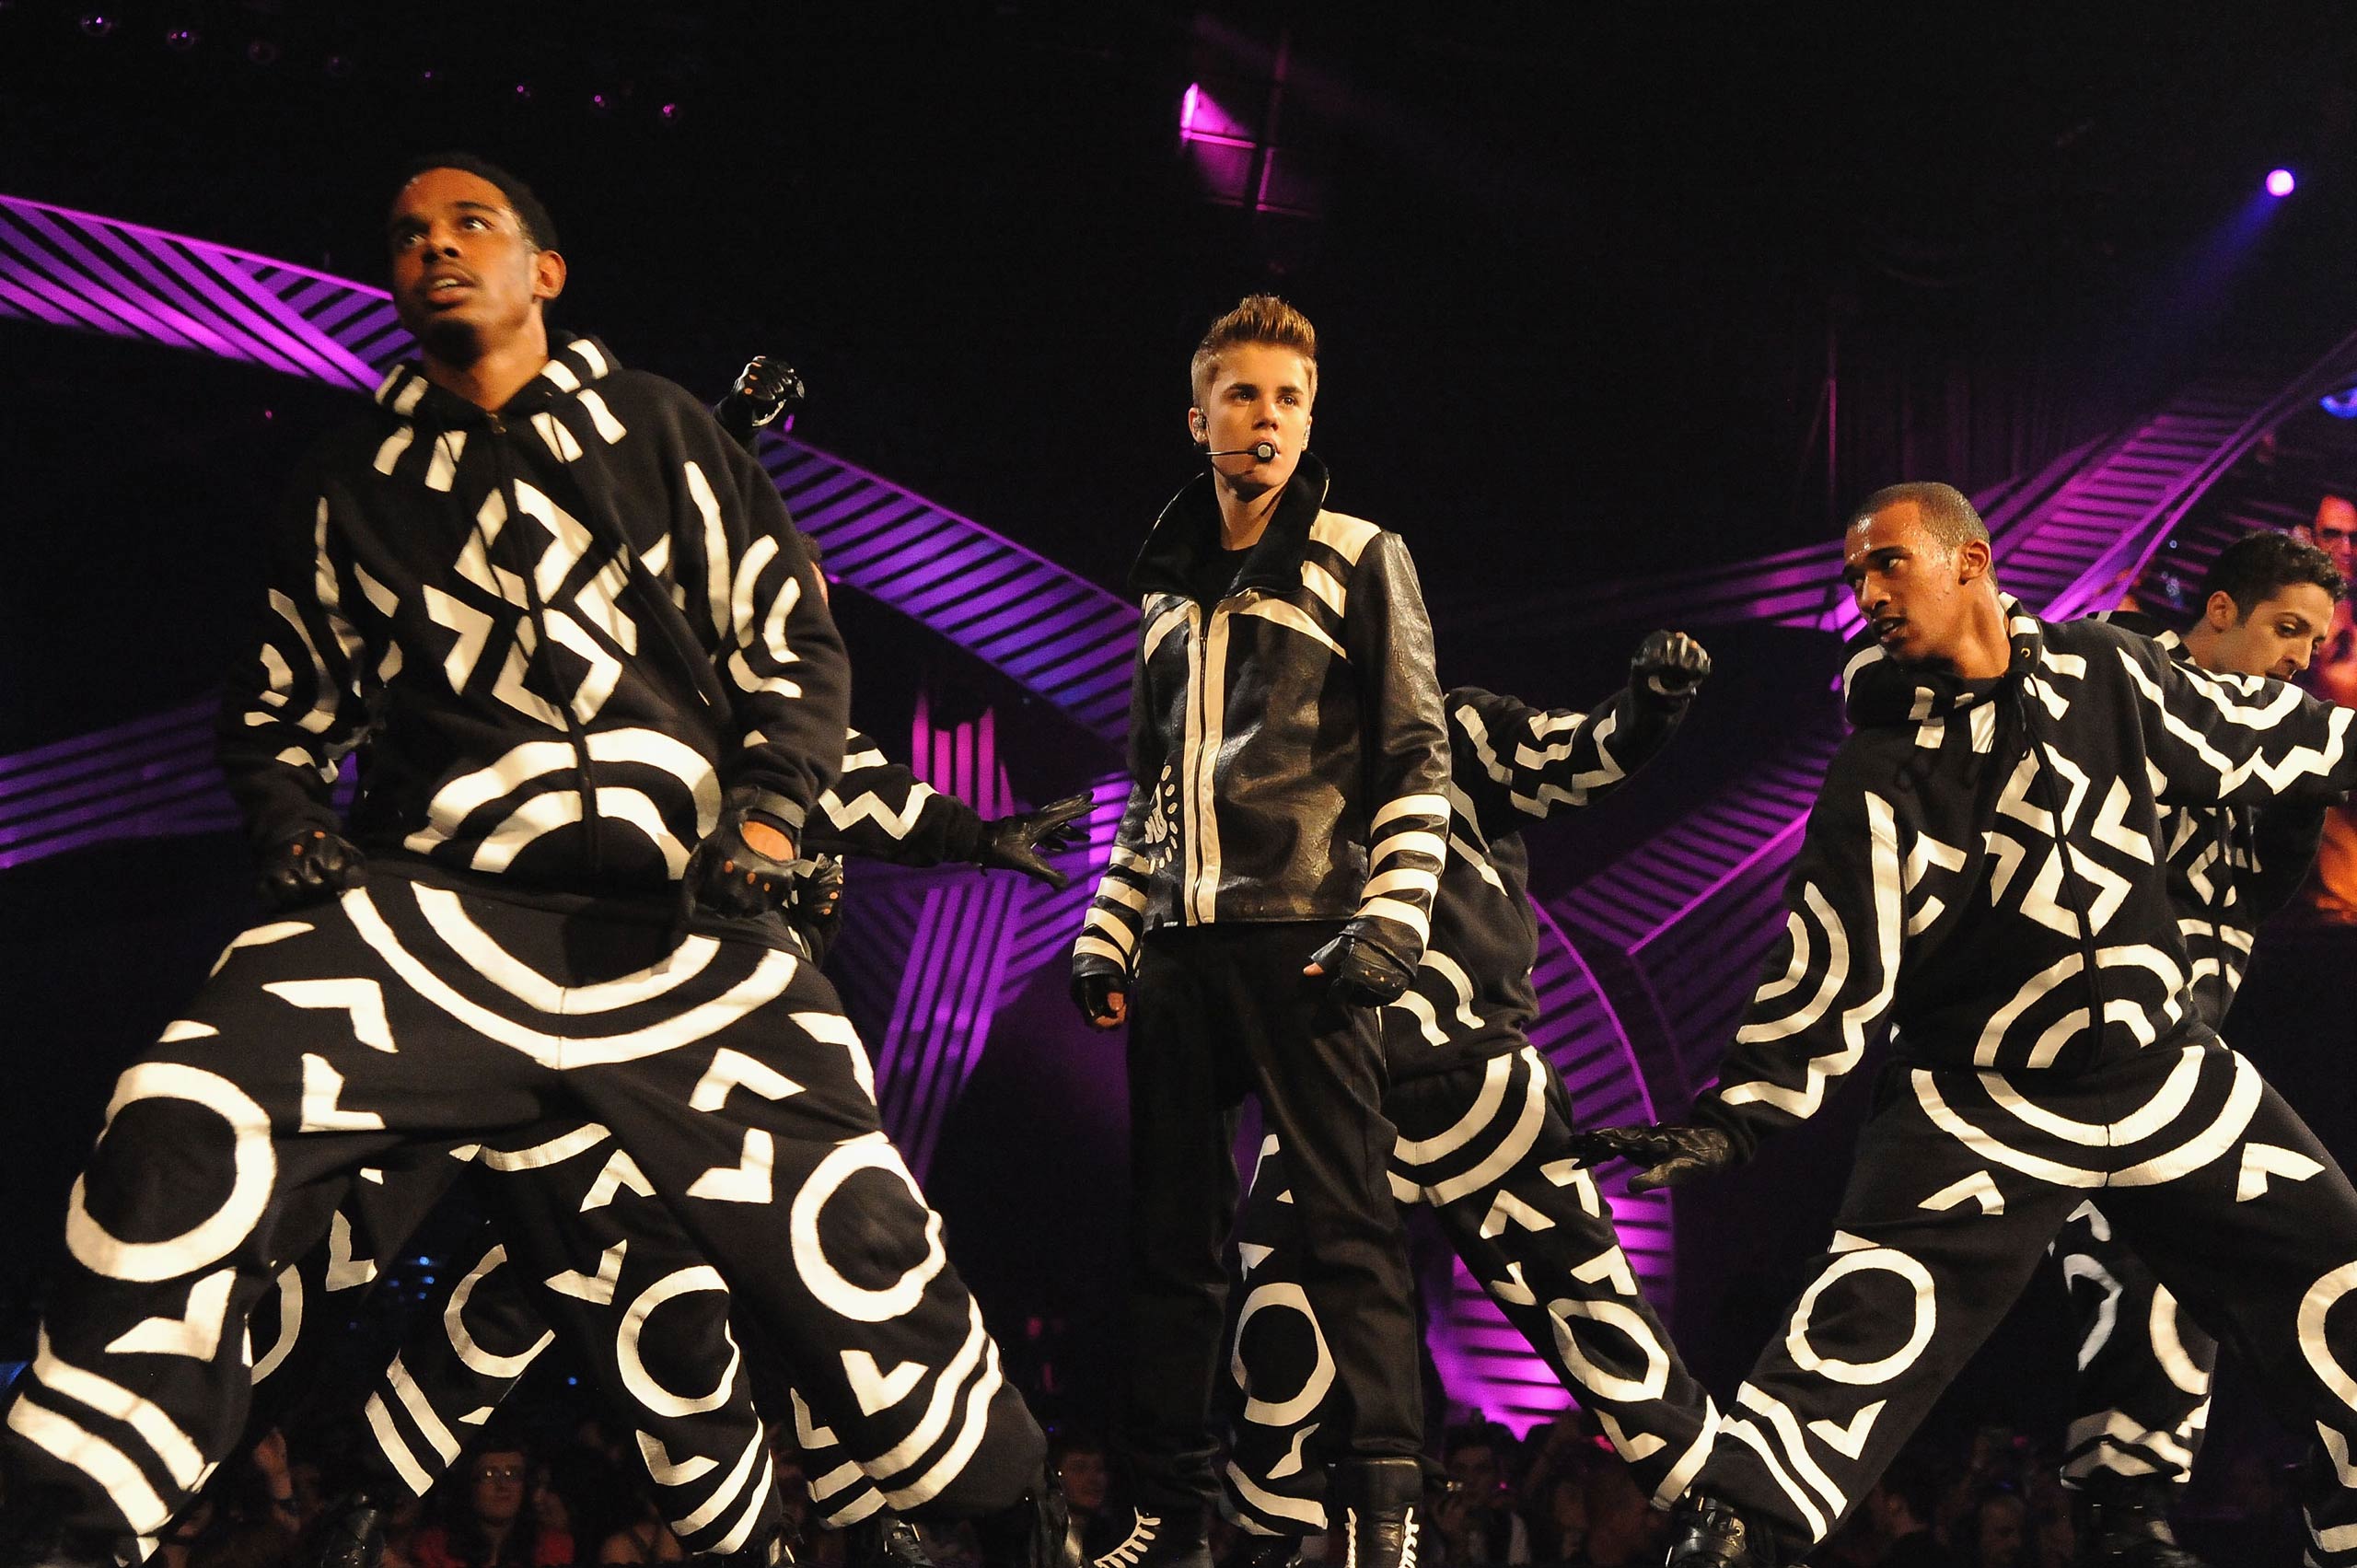 Justin Bieber performs onstage during the MTV Europe Music Awards 2011 live show at the Odyssey Arena in Belfast, Northern Ireland in 2011.